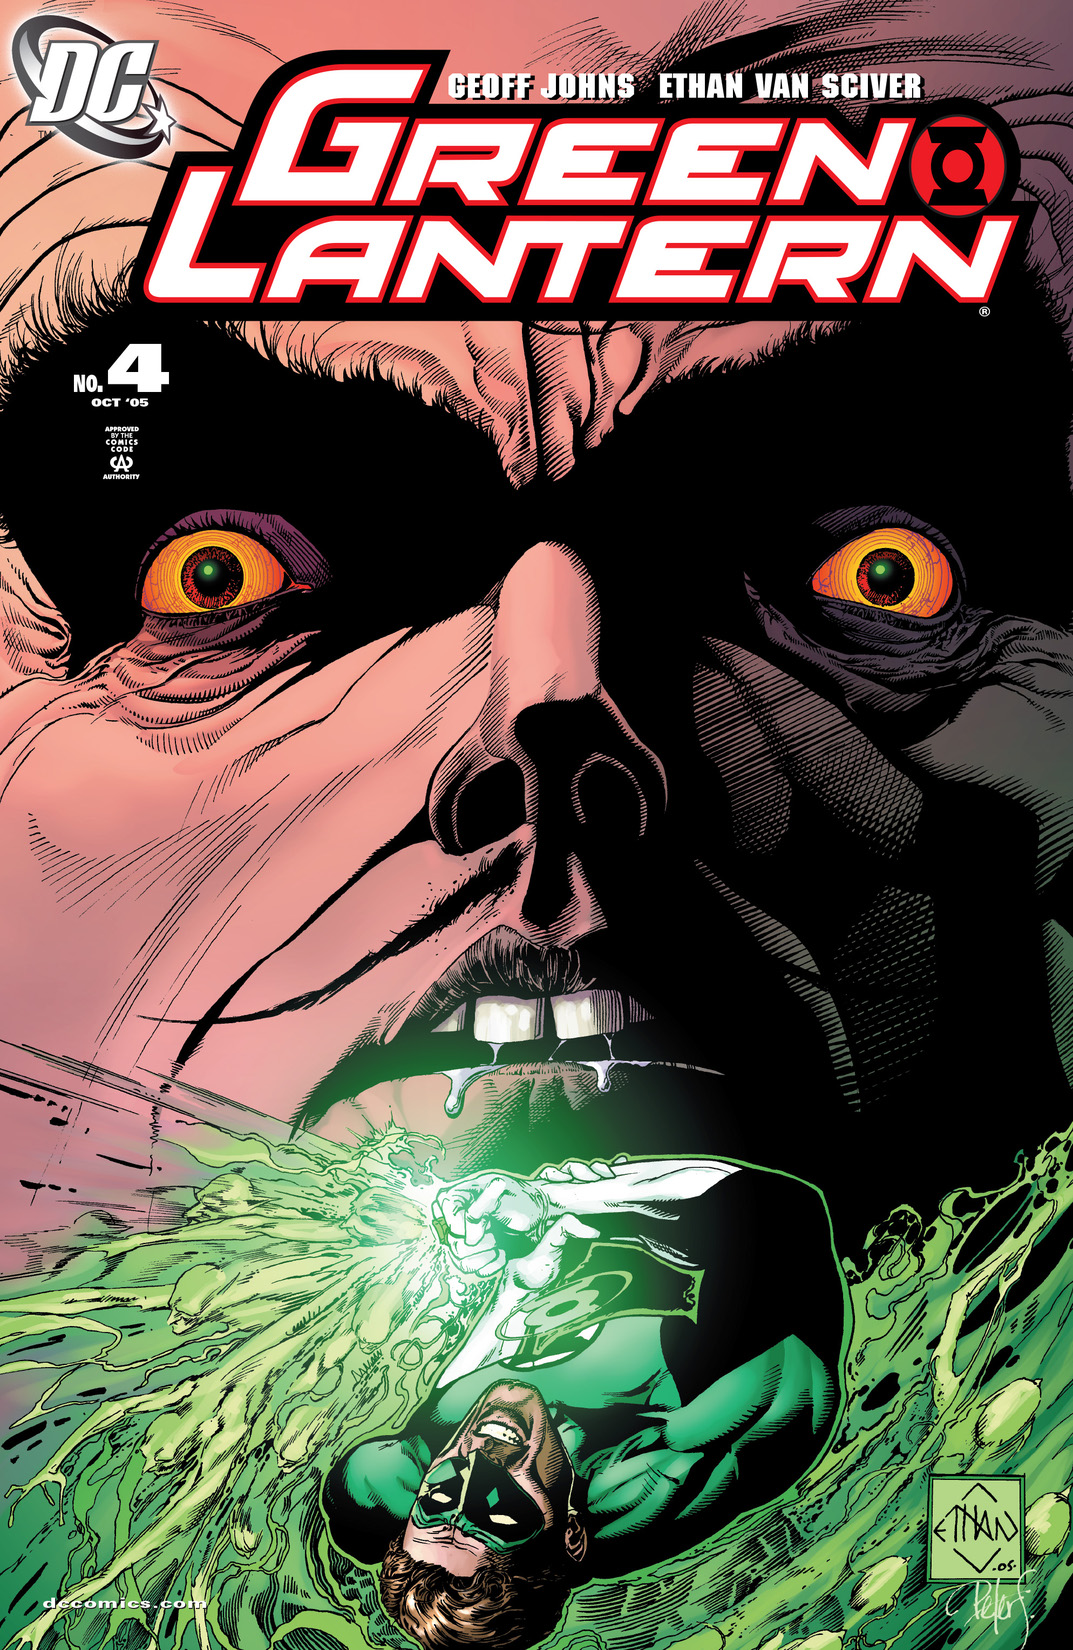 Green Lantern (2005-2011) #4 preview images